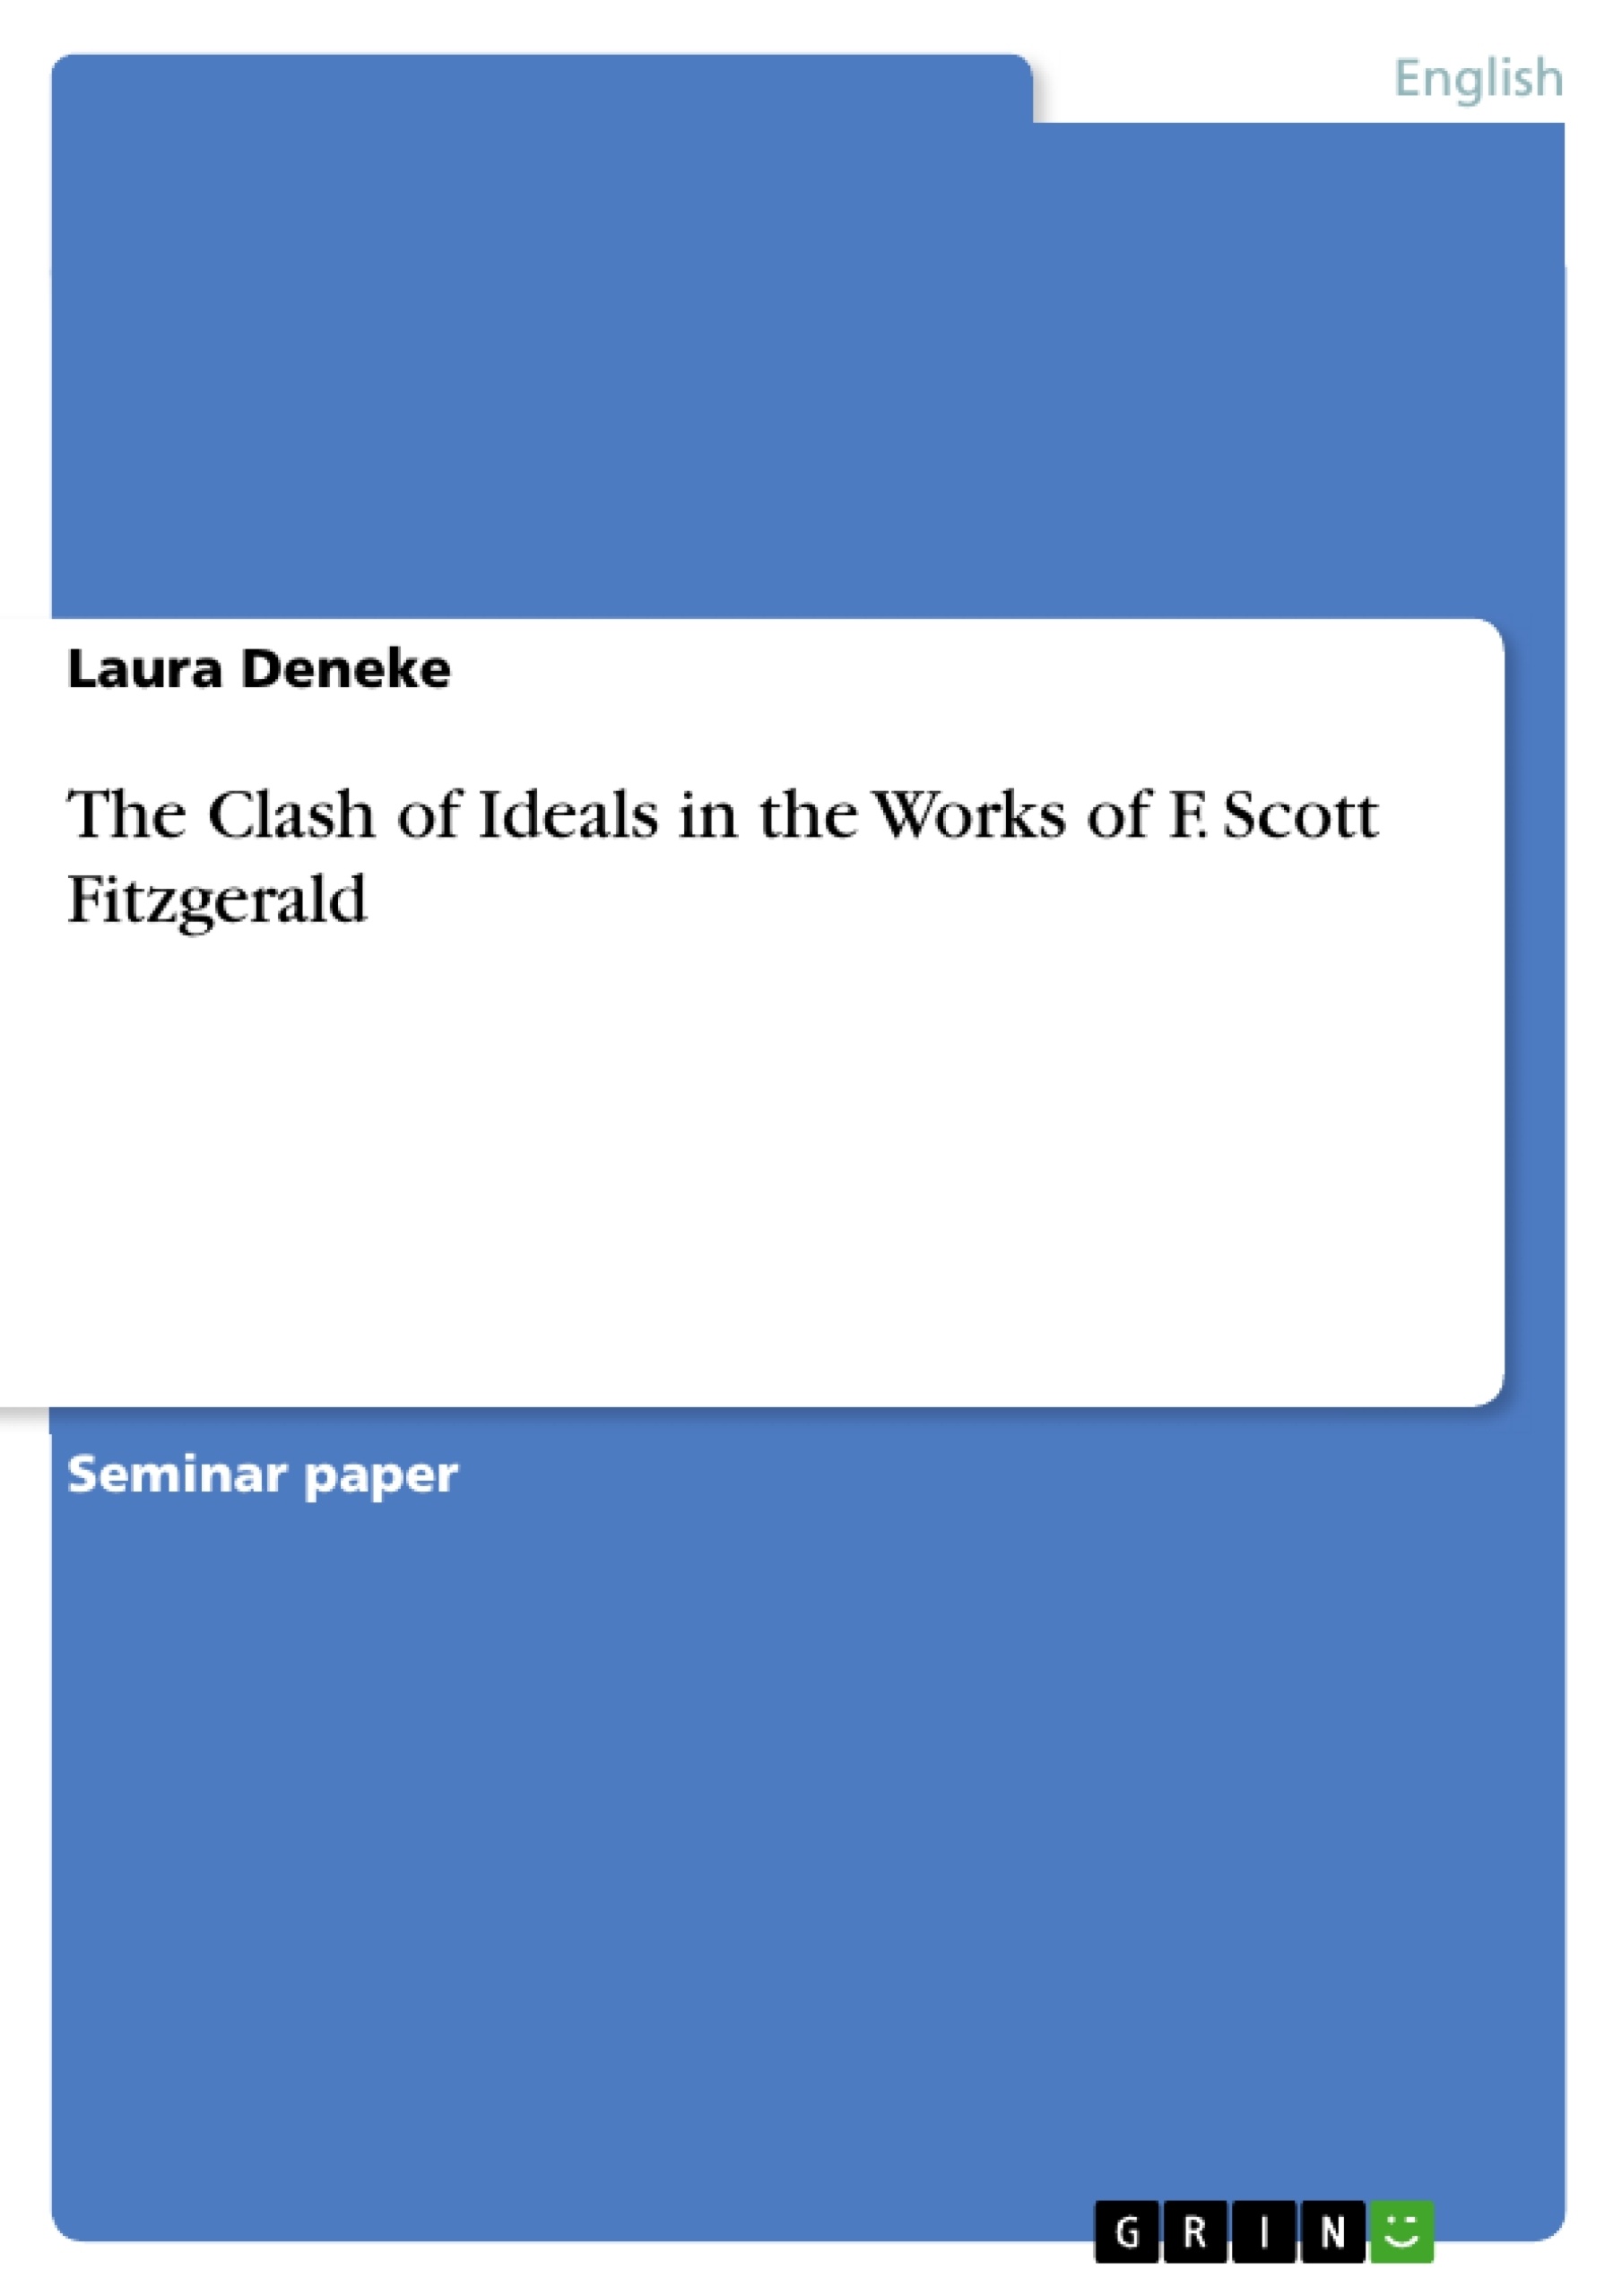 Title: The Clash of Ideals in the Works of F. Scott Fitzgerald